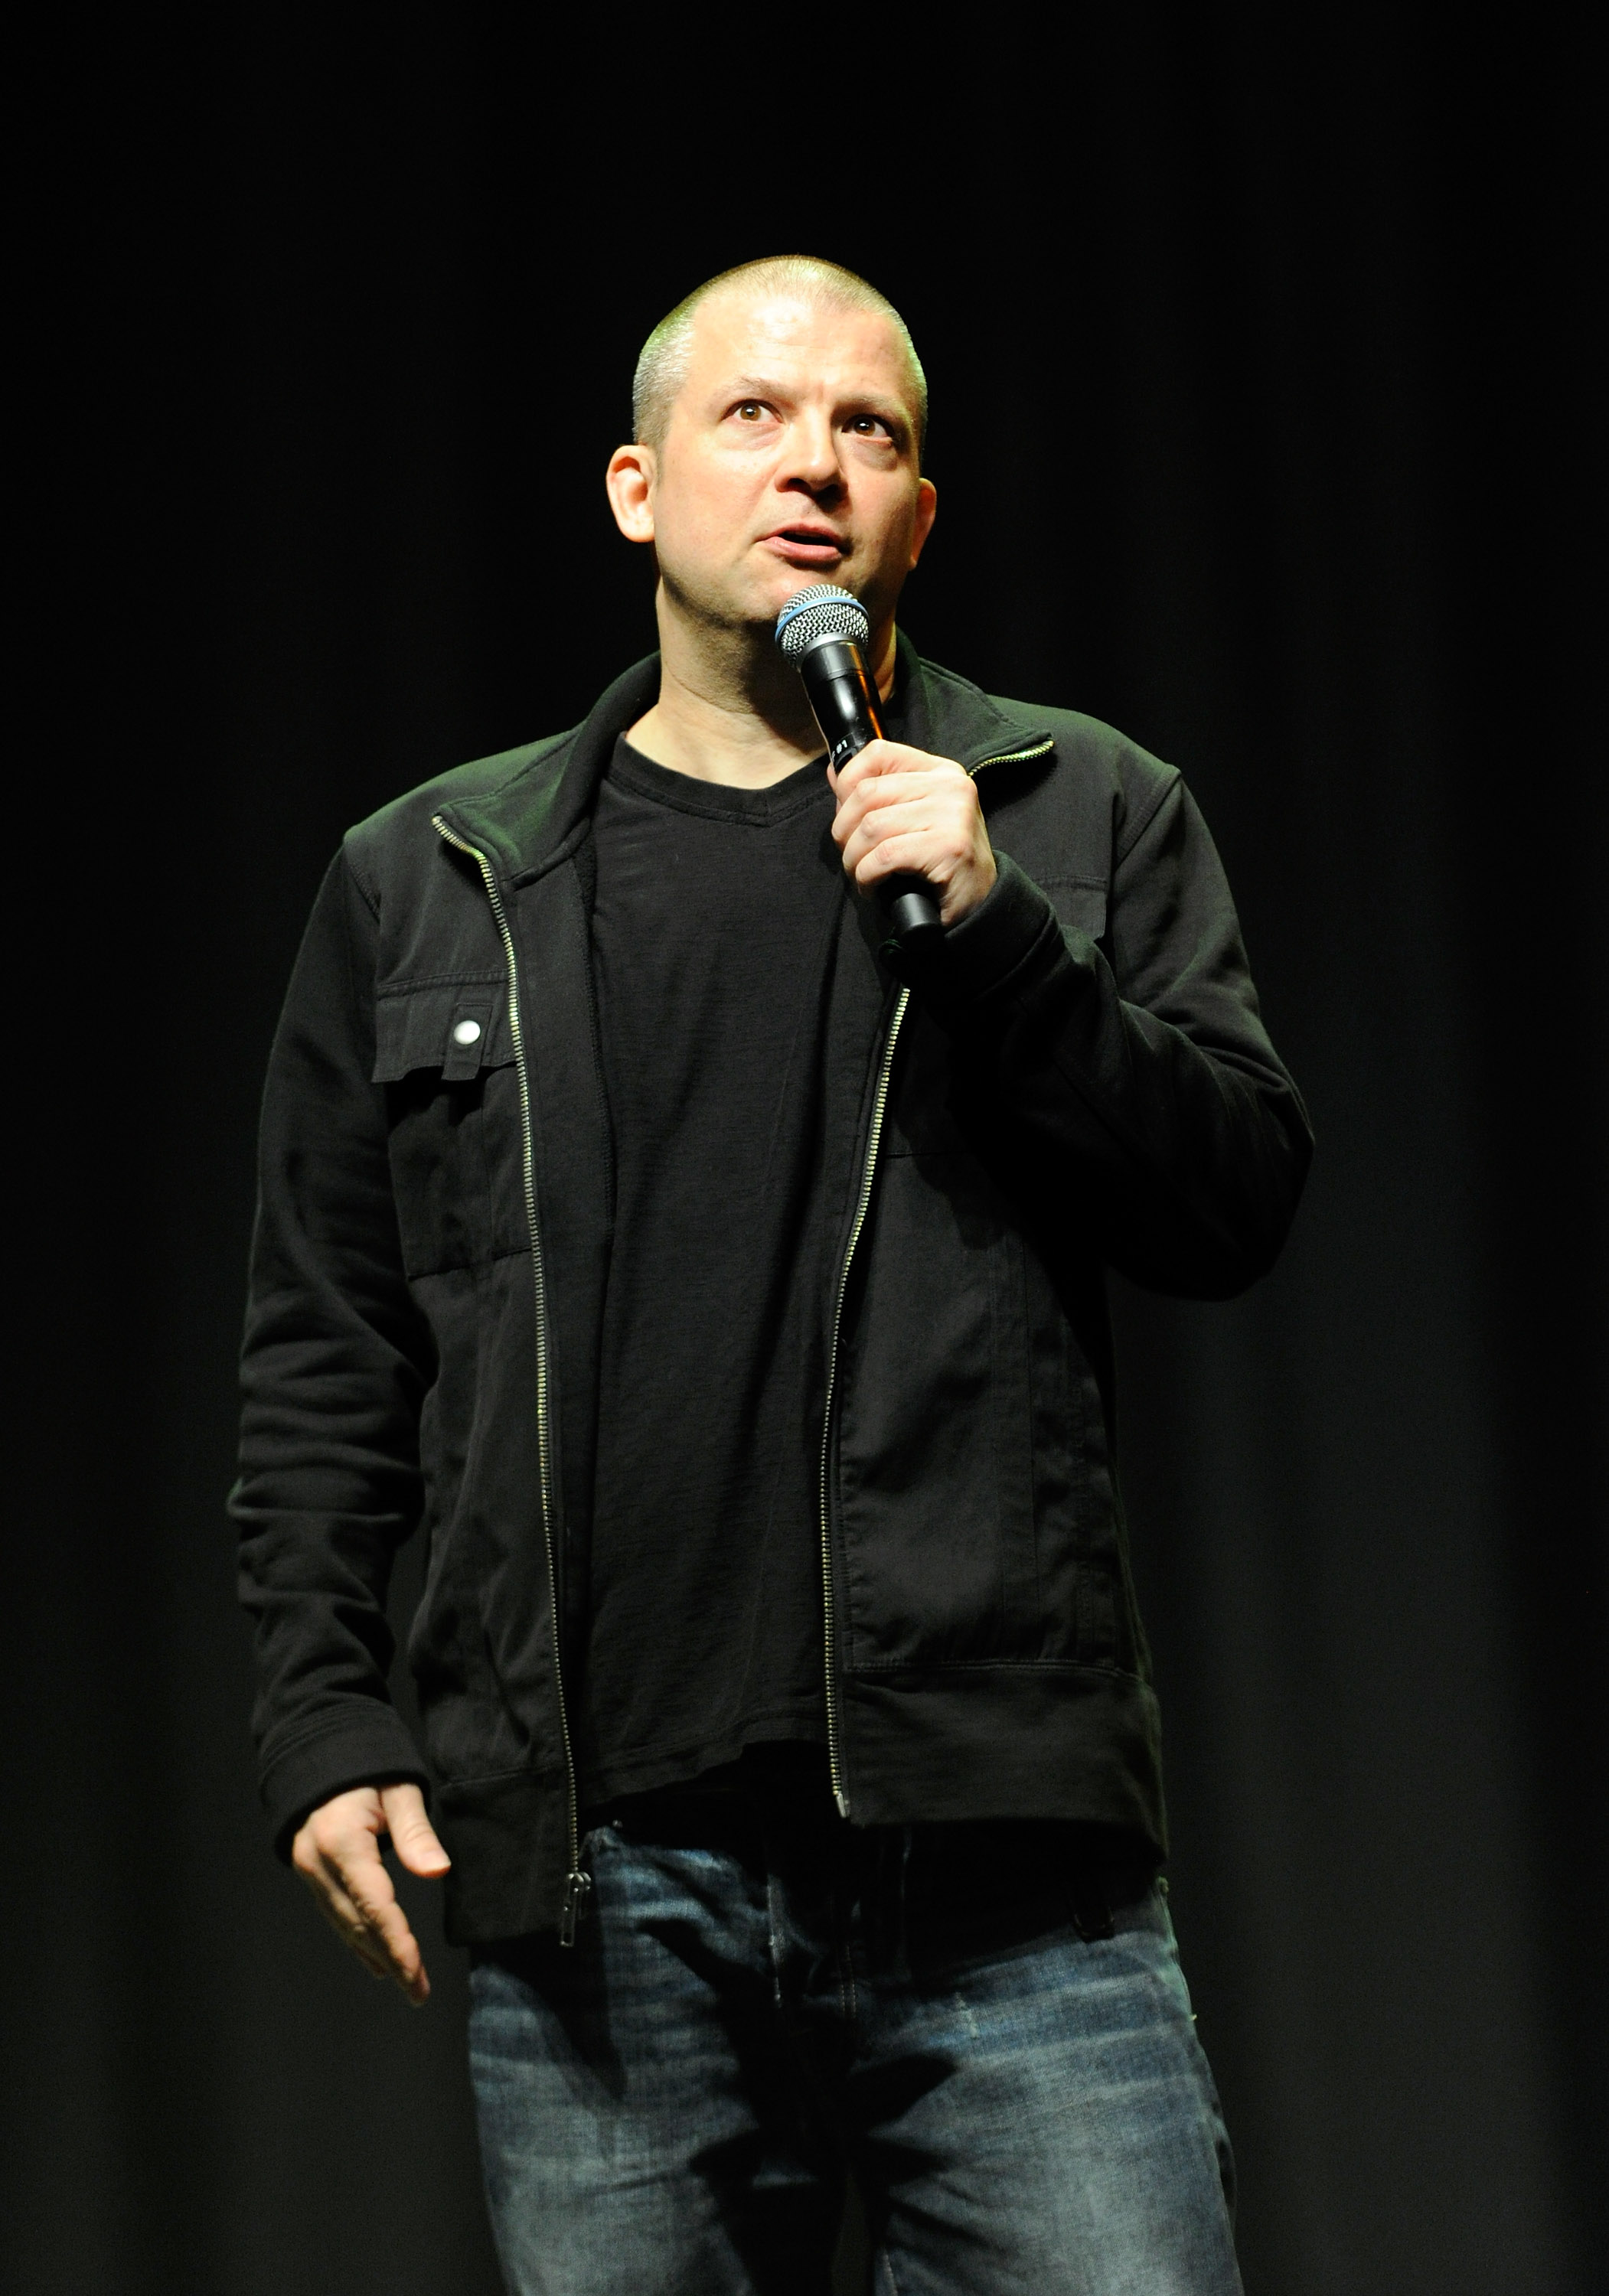 Comedian Jim Norton performs during <i>The Anti-Social Network</i> comedy show at the Palms Casino Resort in Las Vegas on July 3, 2011 (Ethan Miller&mdash;Getty Images)